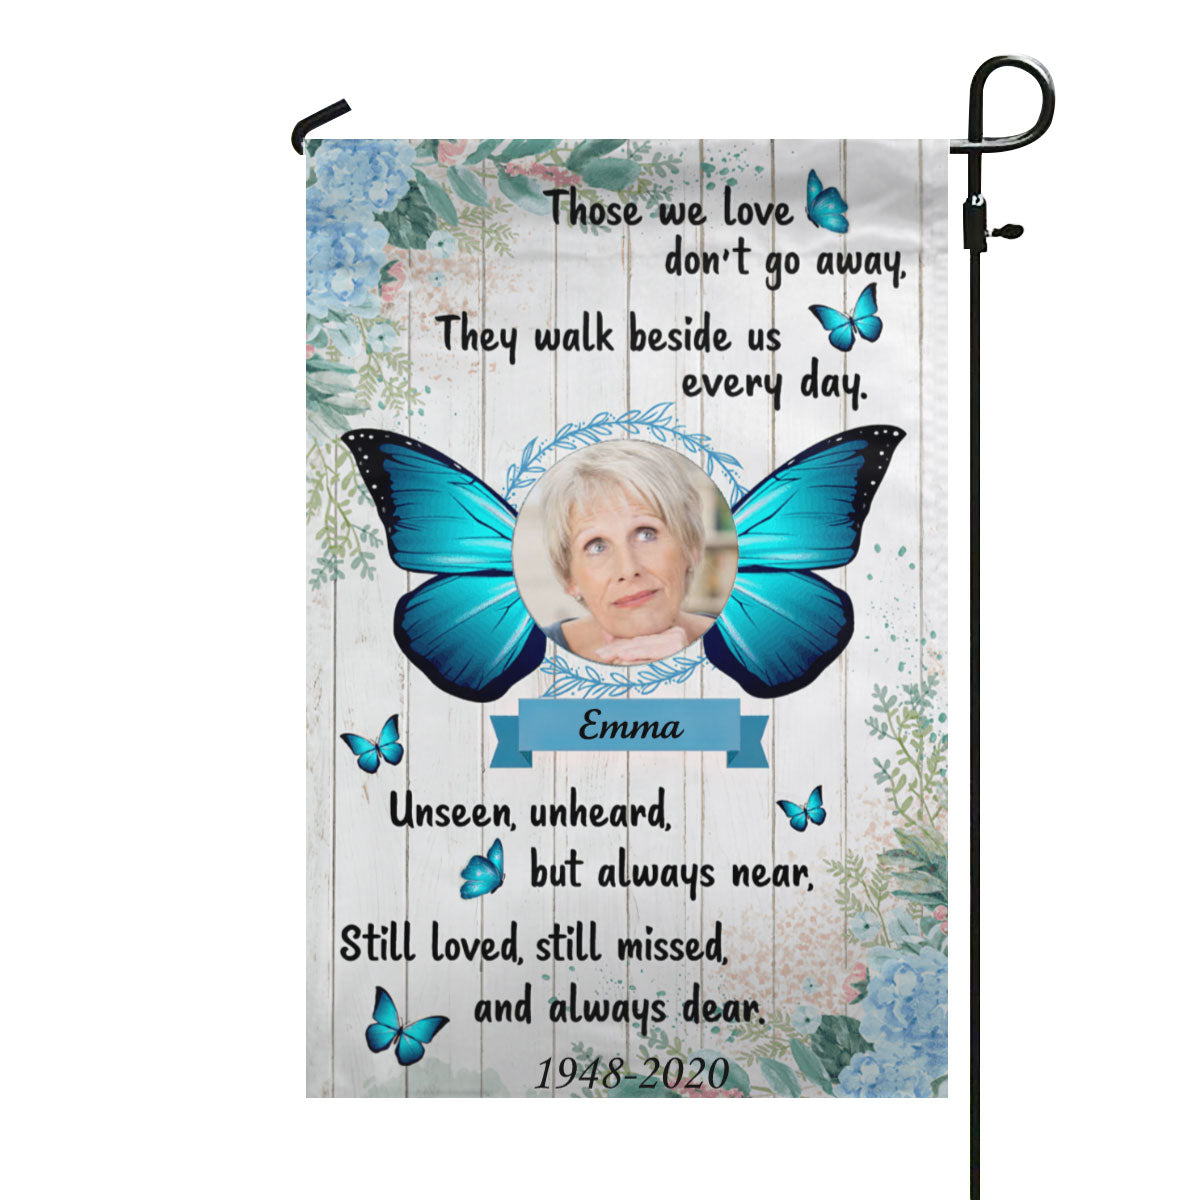 Those We Love Don't Go Away Memorial Photo Personalized Garden Flag